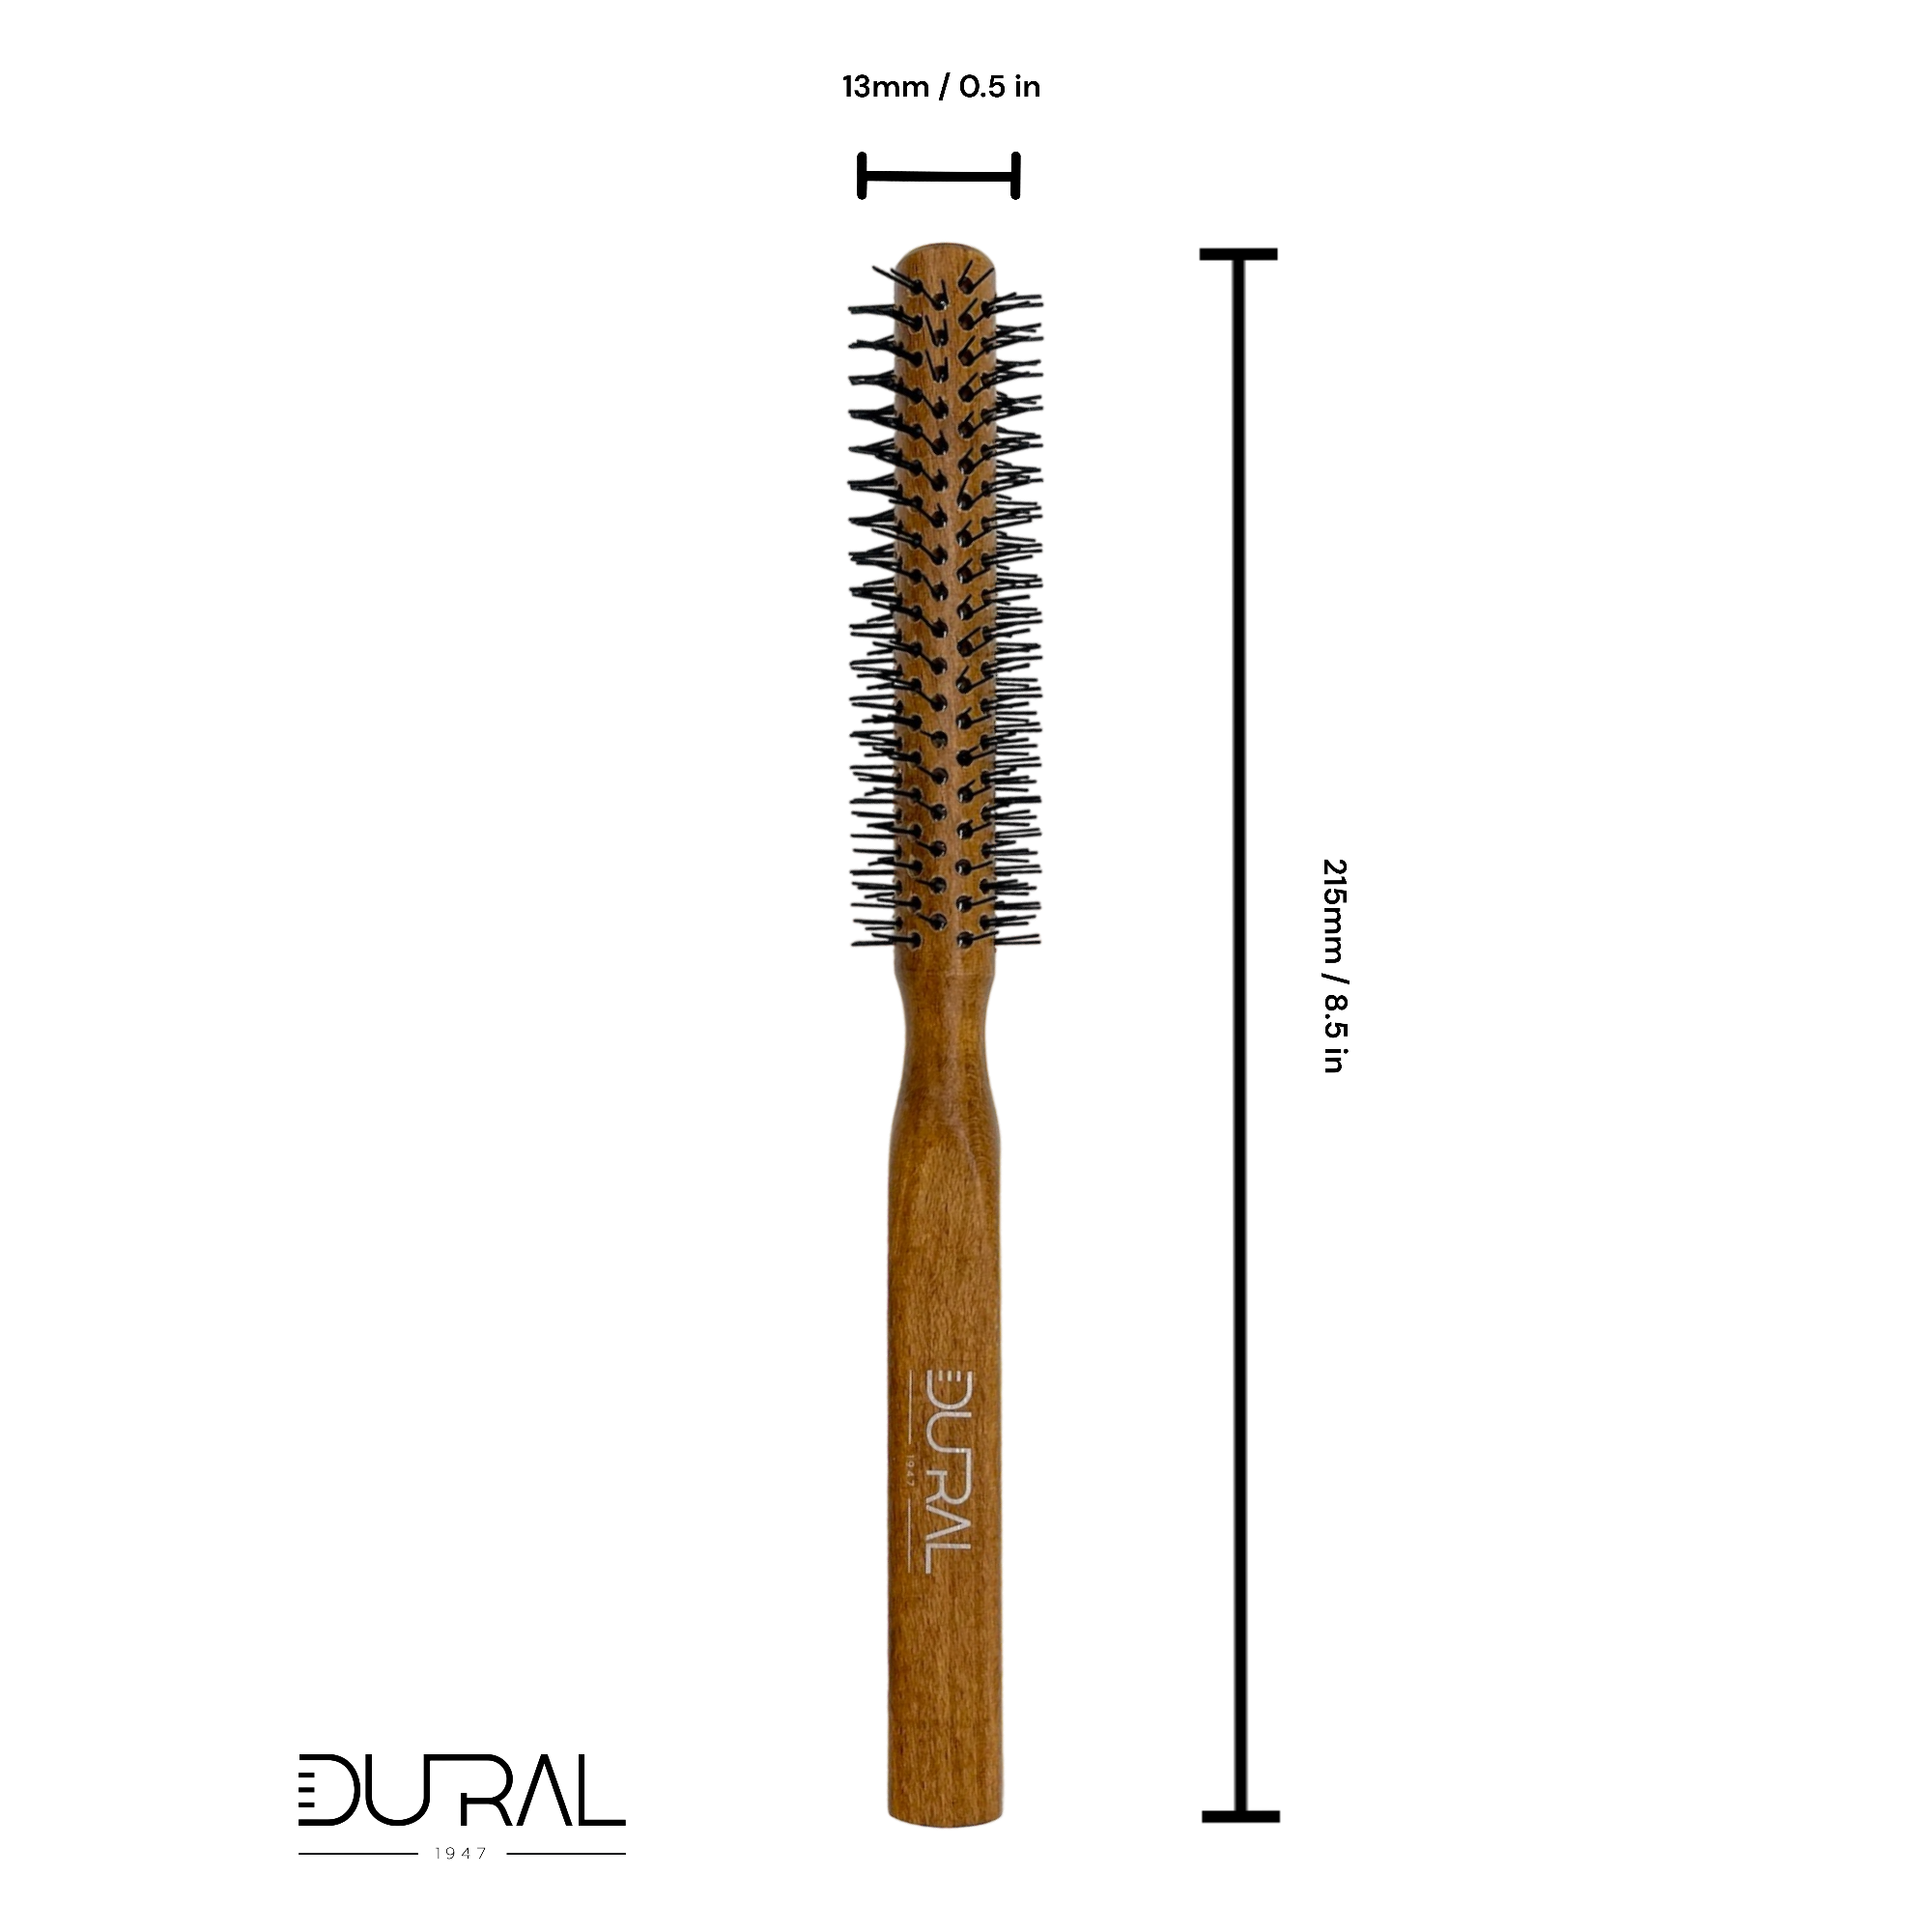 Dural Beech wood round-styler hair brush with nylon pins - 12 rows